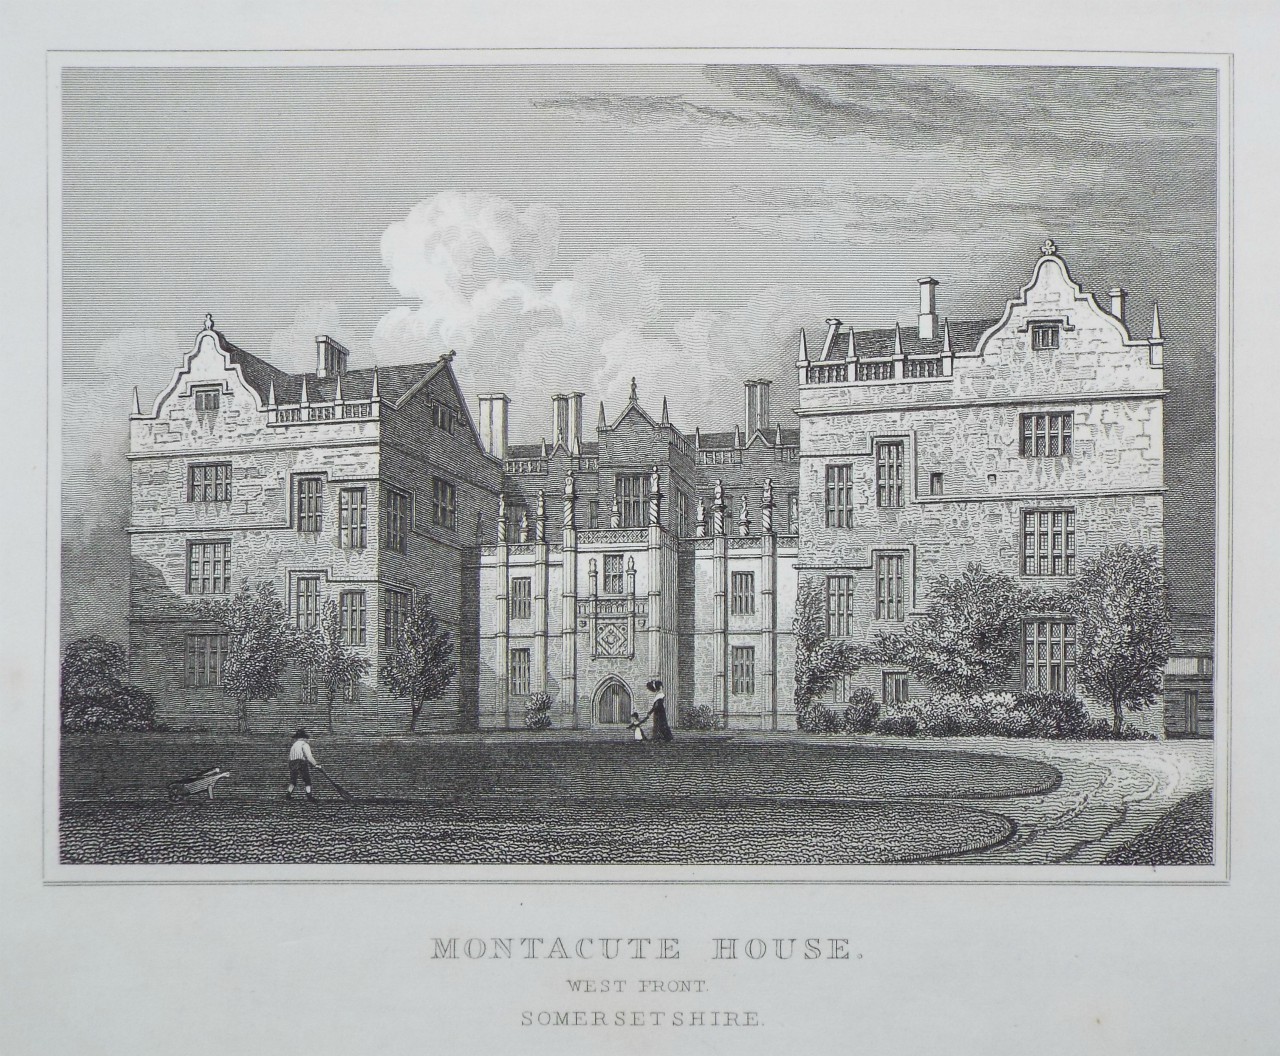 Print - Montacute House. West Front. Somersetshire. - Lacey